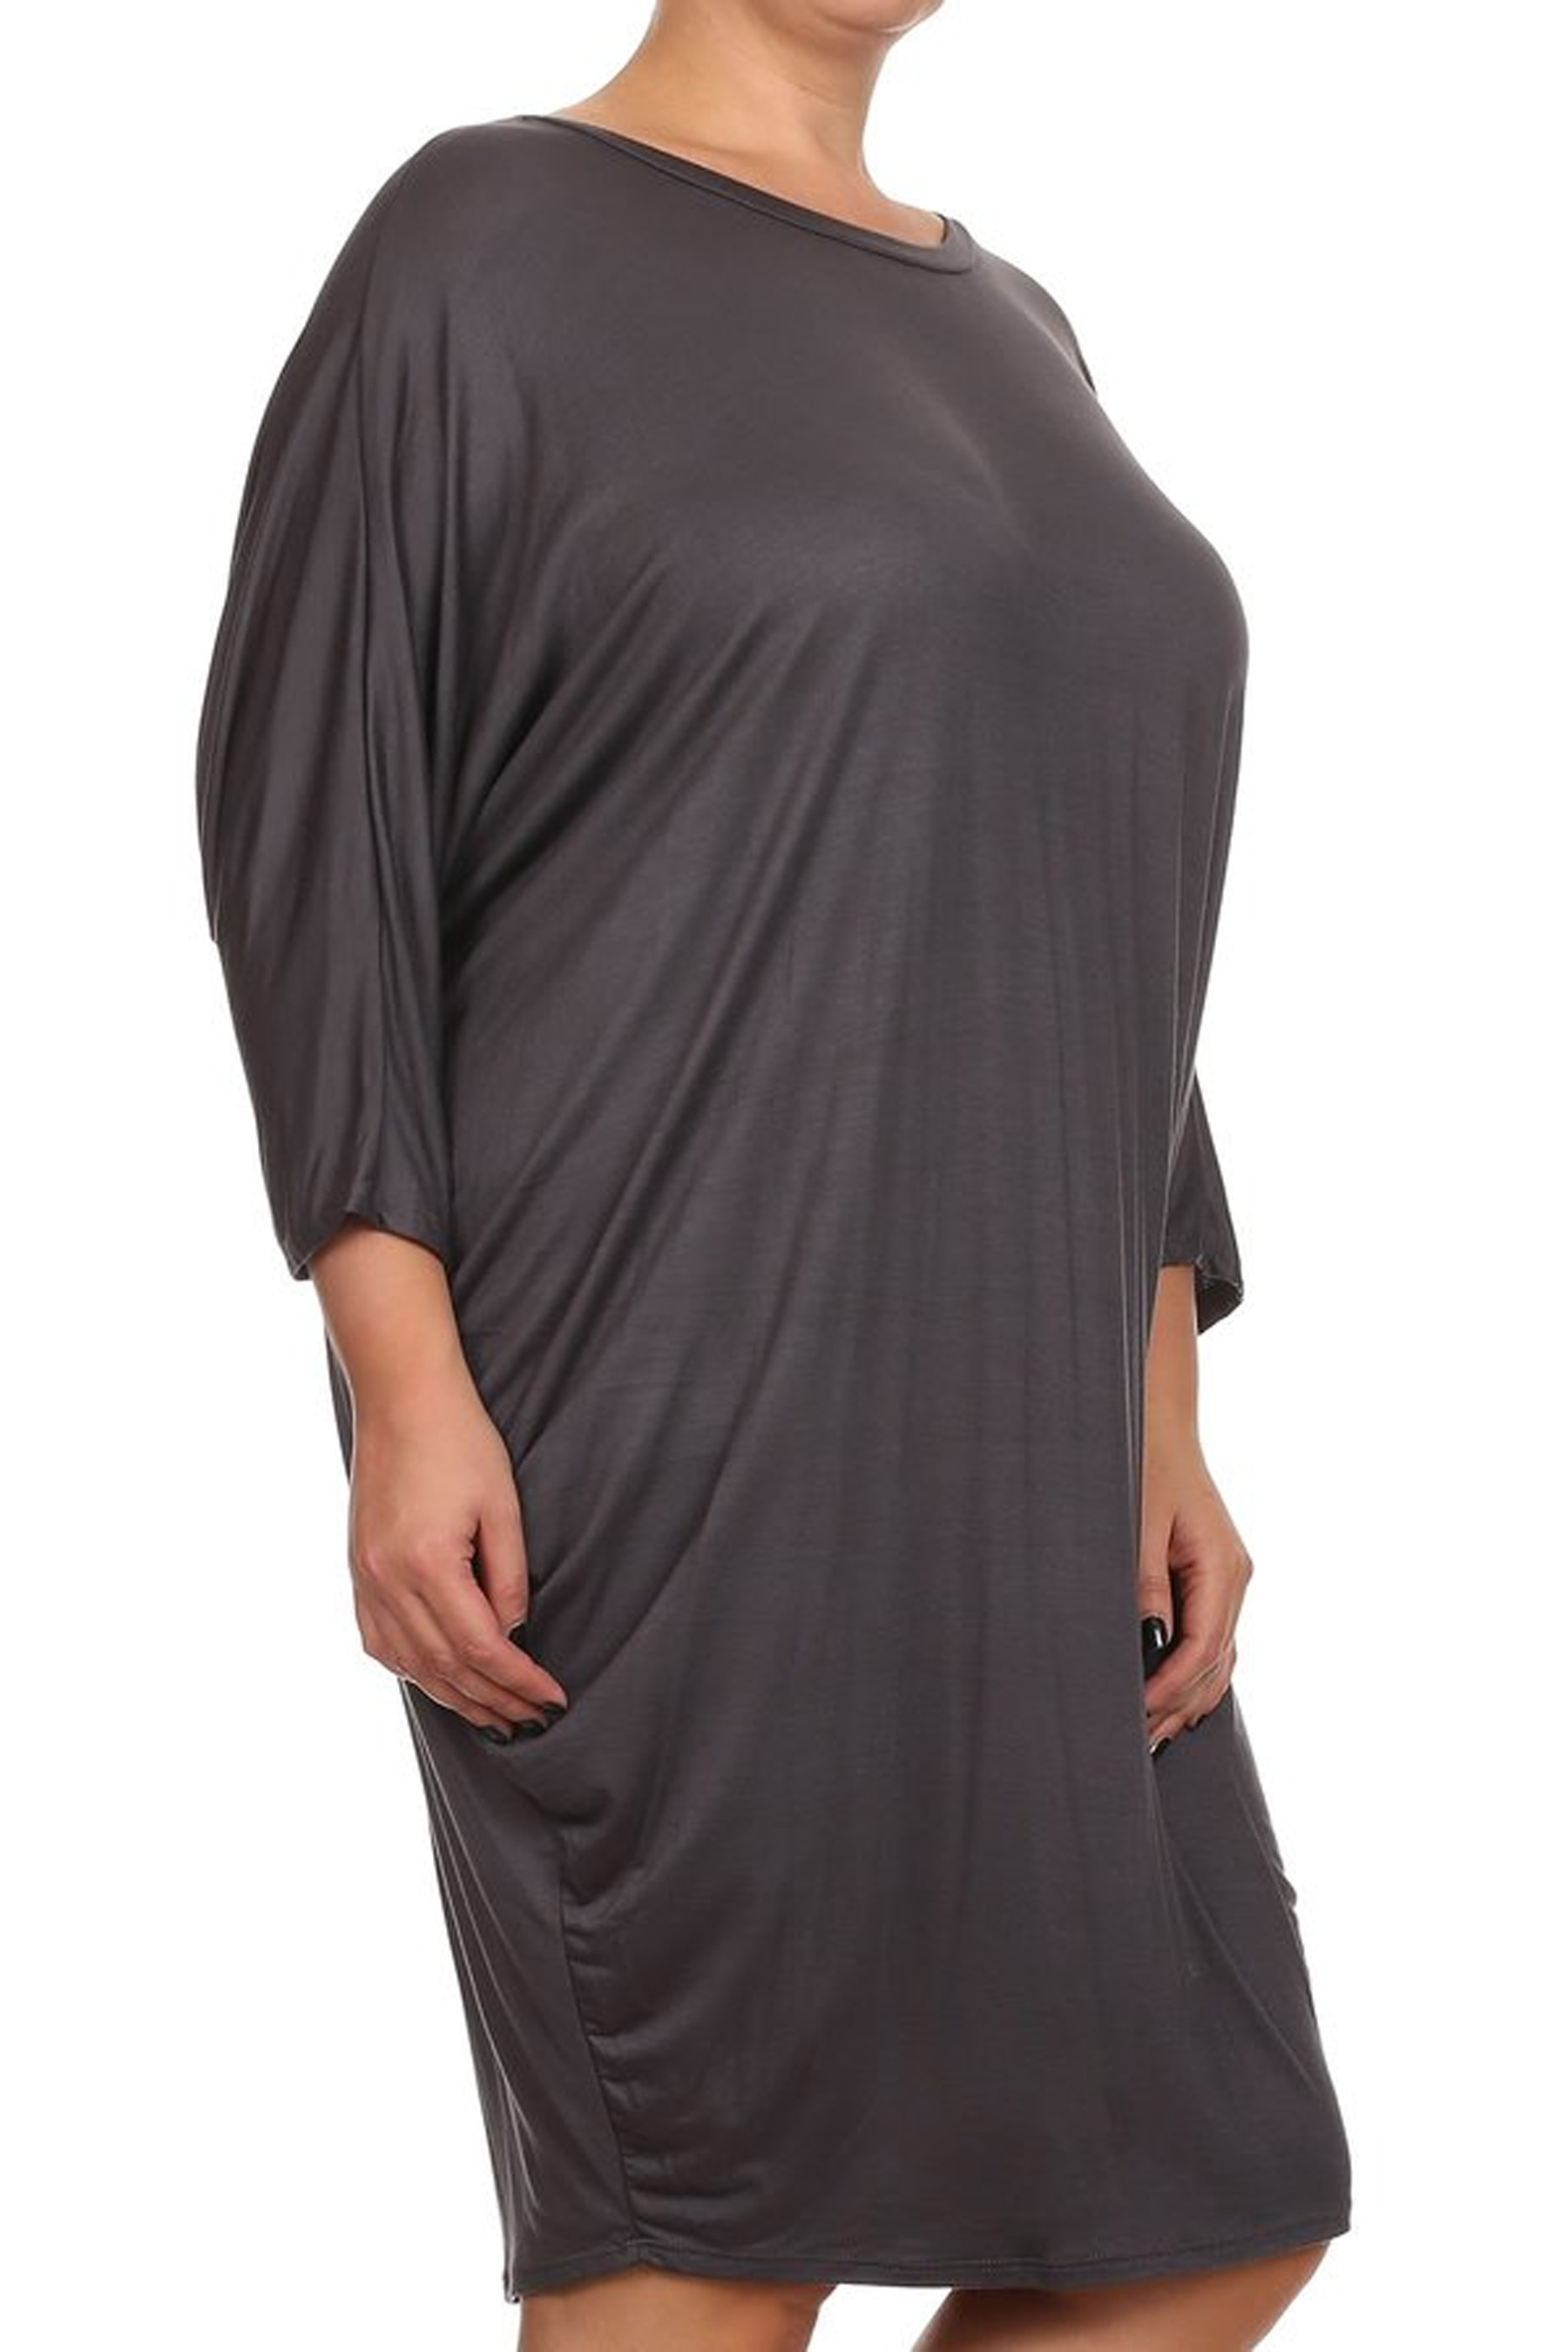 Women's Casual Plus Size Loose Fit Long Sleeve Dolman Style Midi Dress - image 3 of 4